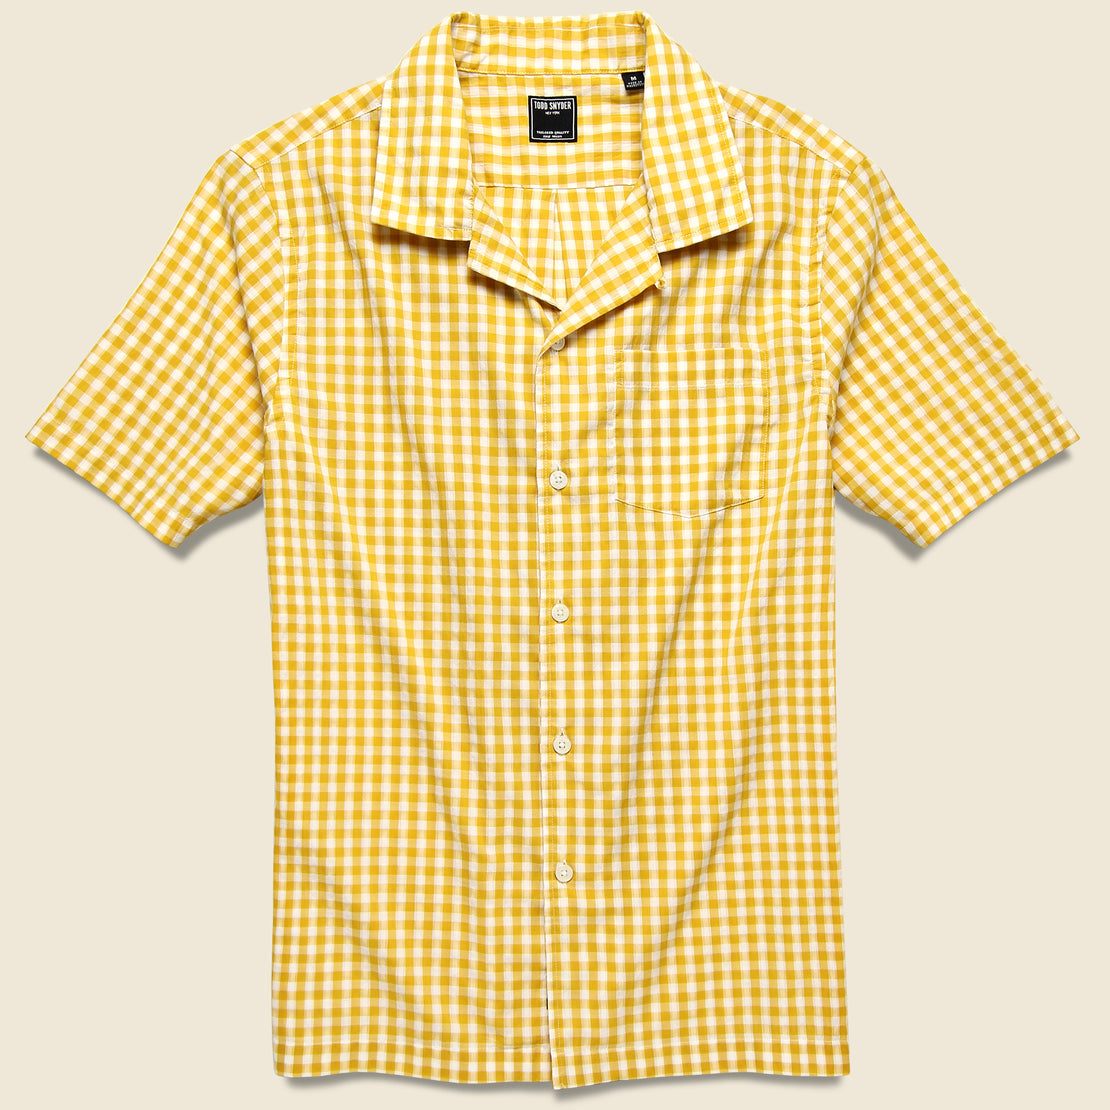 Todd Snyder Micro Gingham Camp Shirt - Yellow